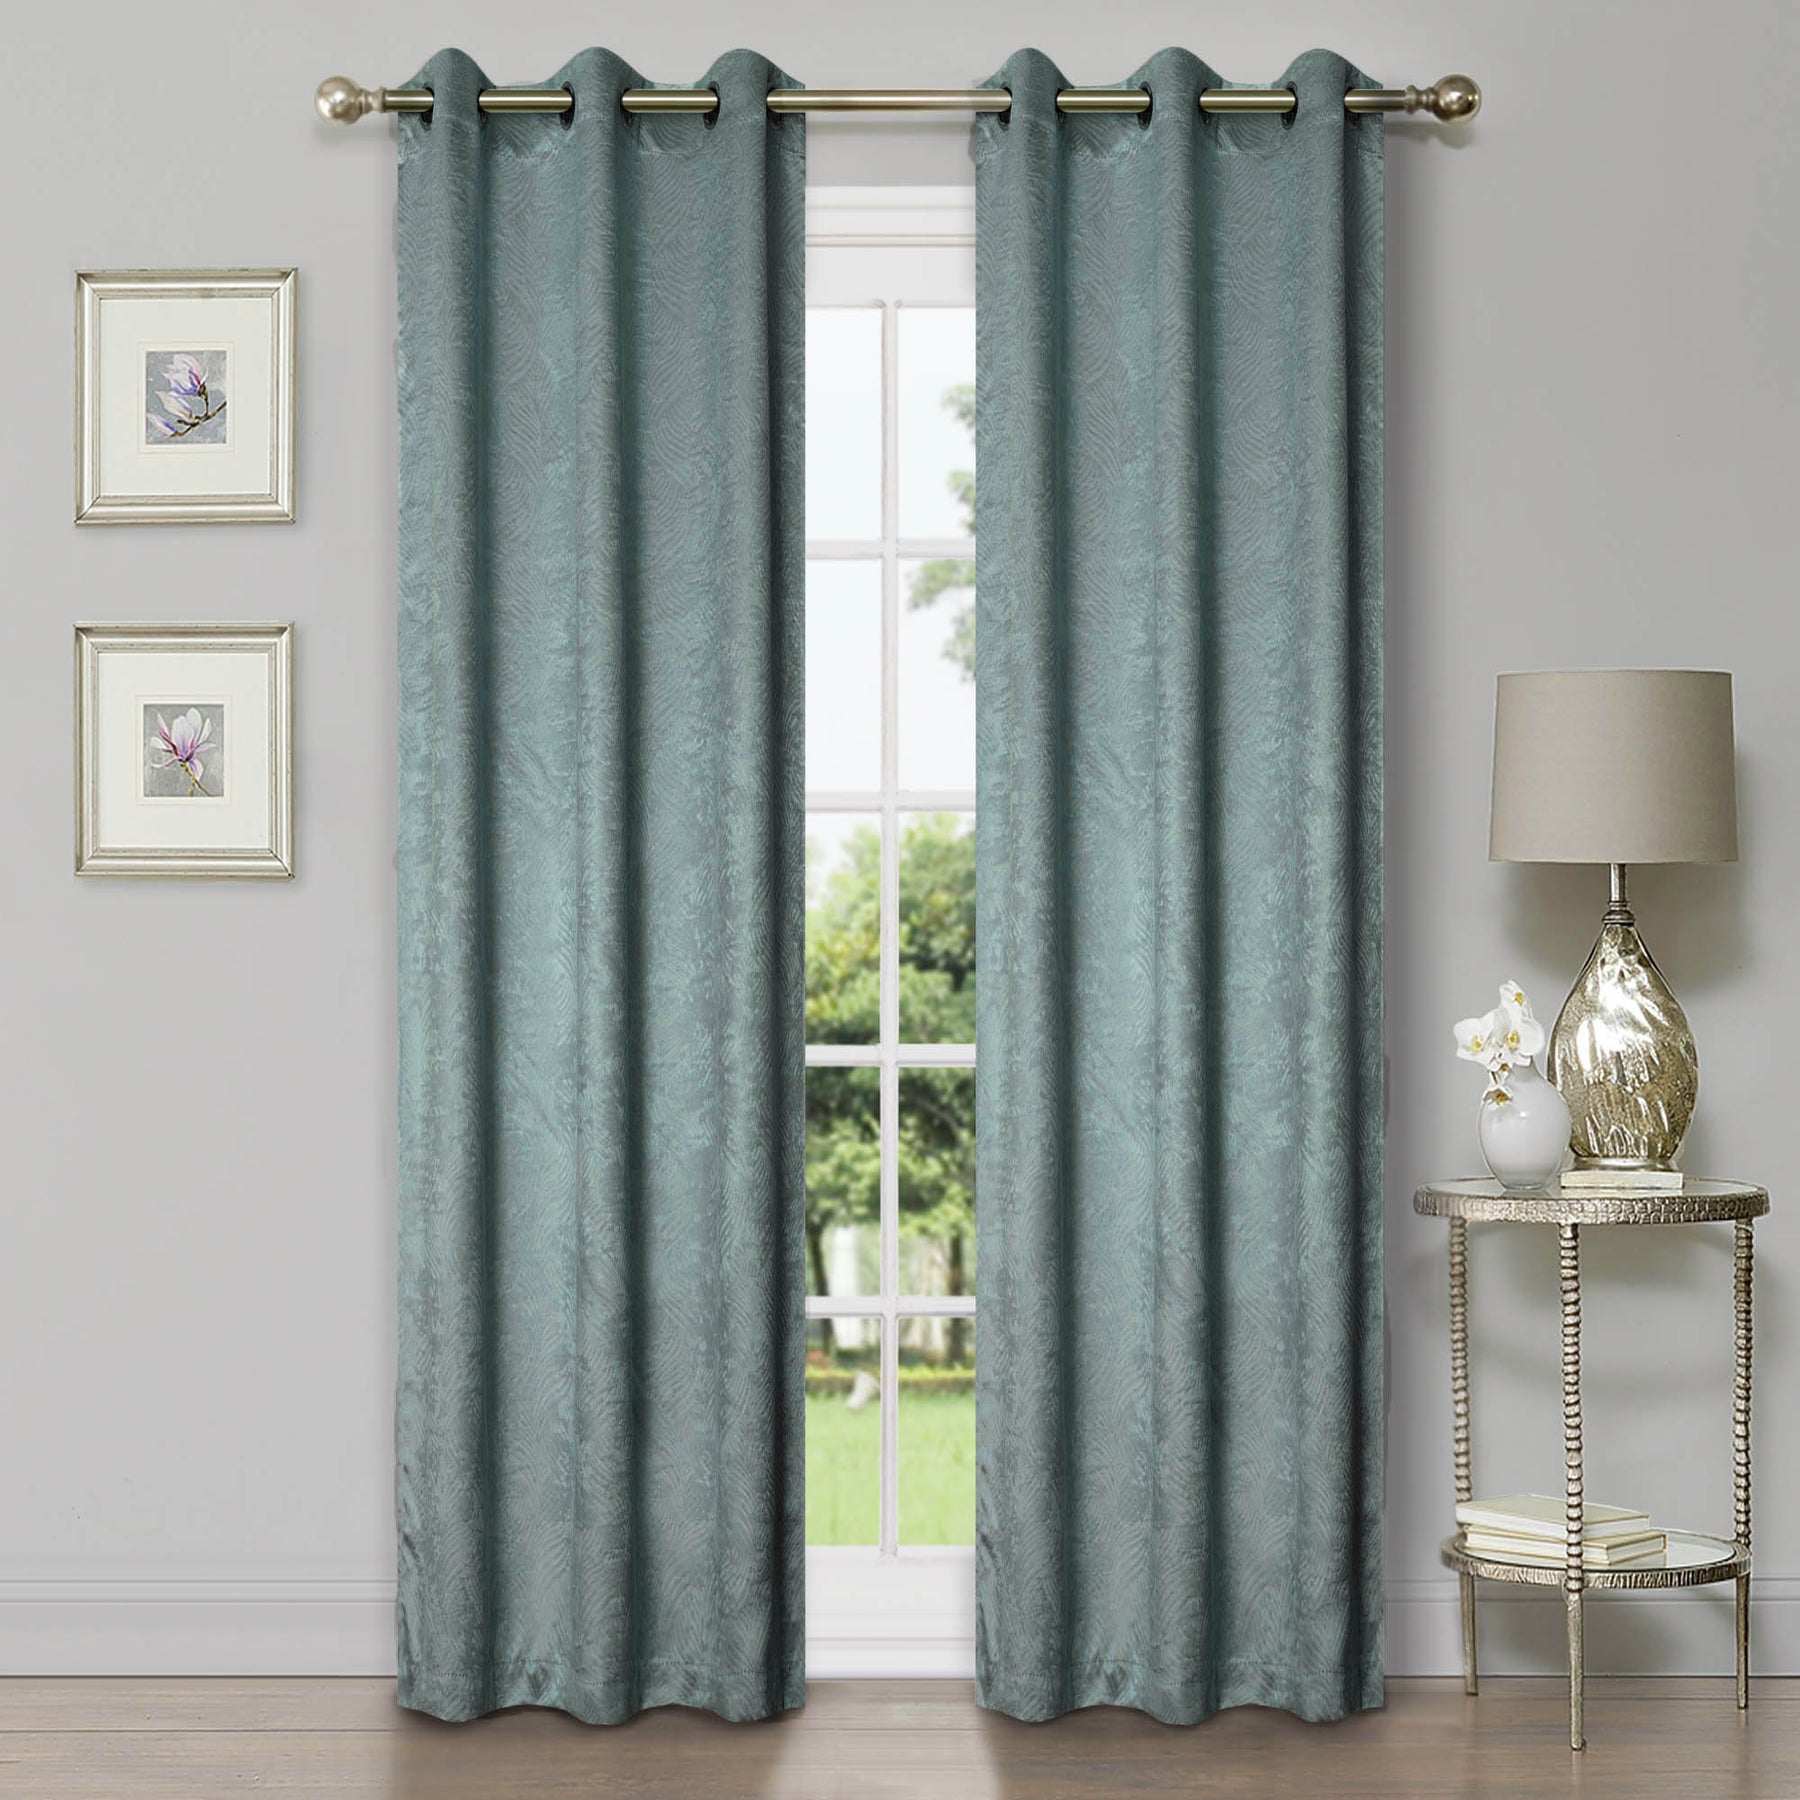 Waverly Thermal Blackout Grommet 2 Piece Curtain Panel Set - Teal